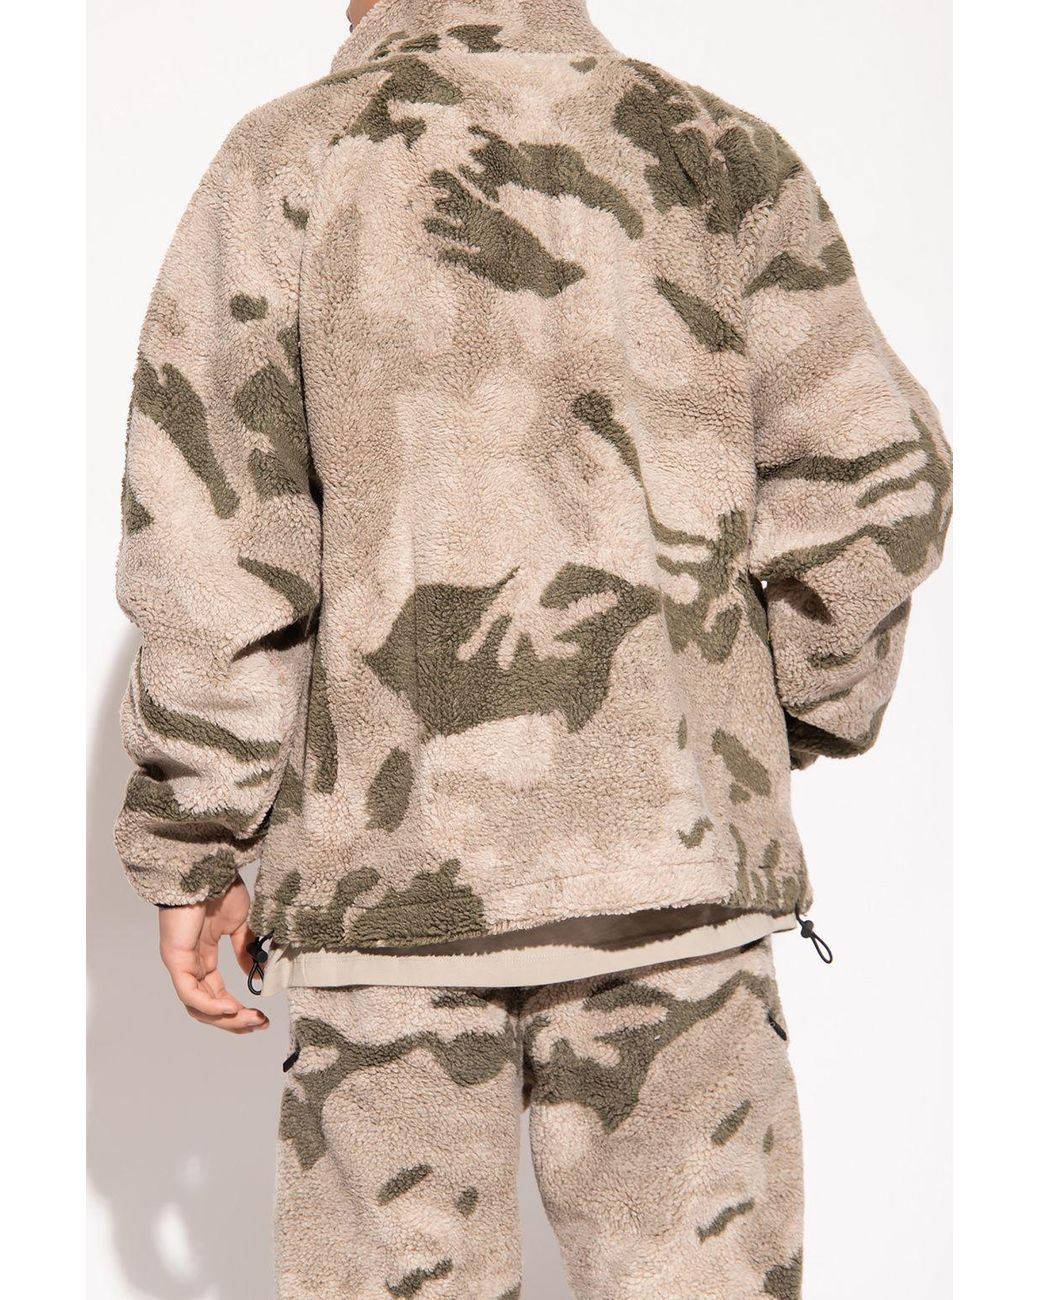 Fear of God ESSENTIALS Fleece Hoodie With Camo Pattern in Natural